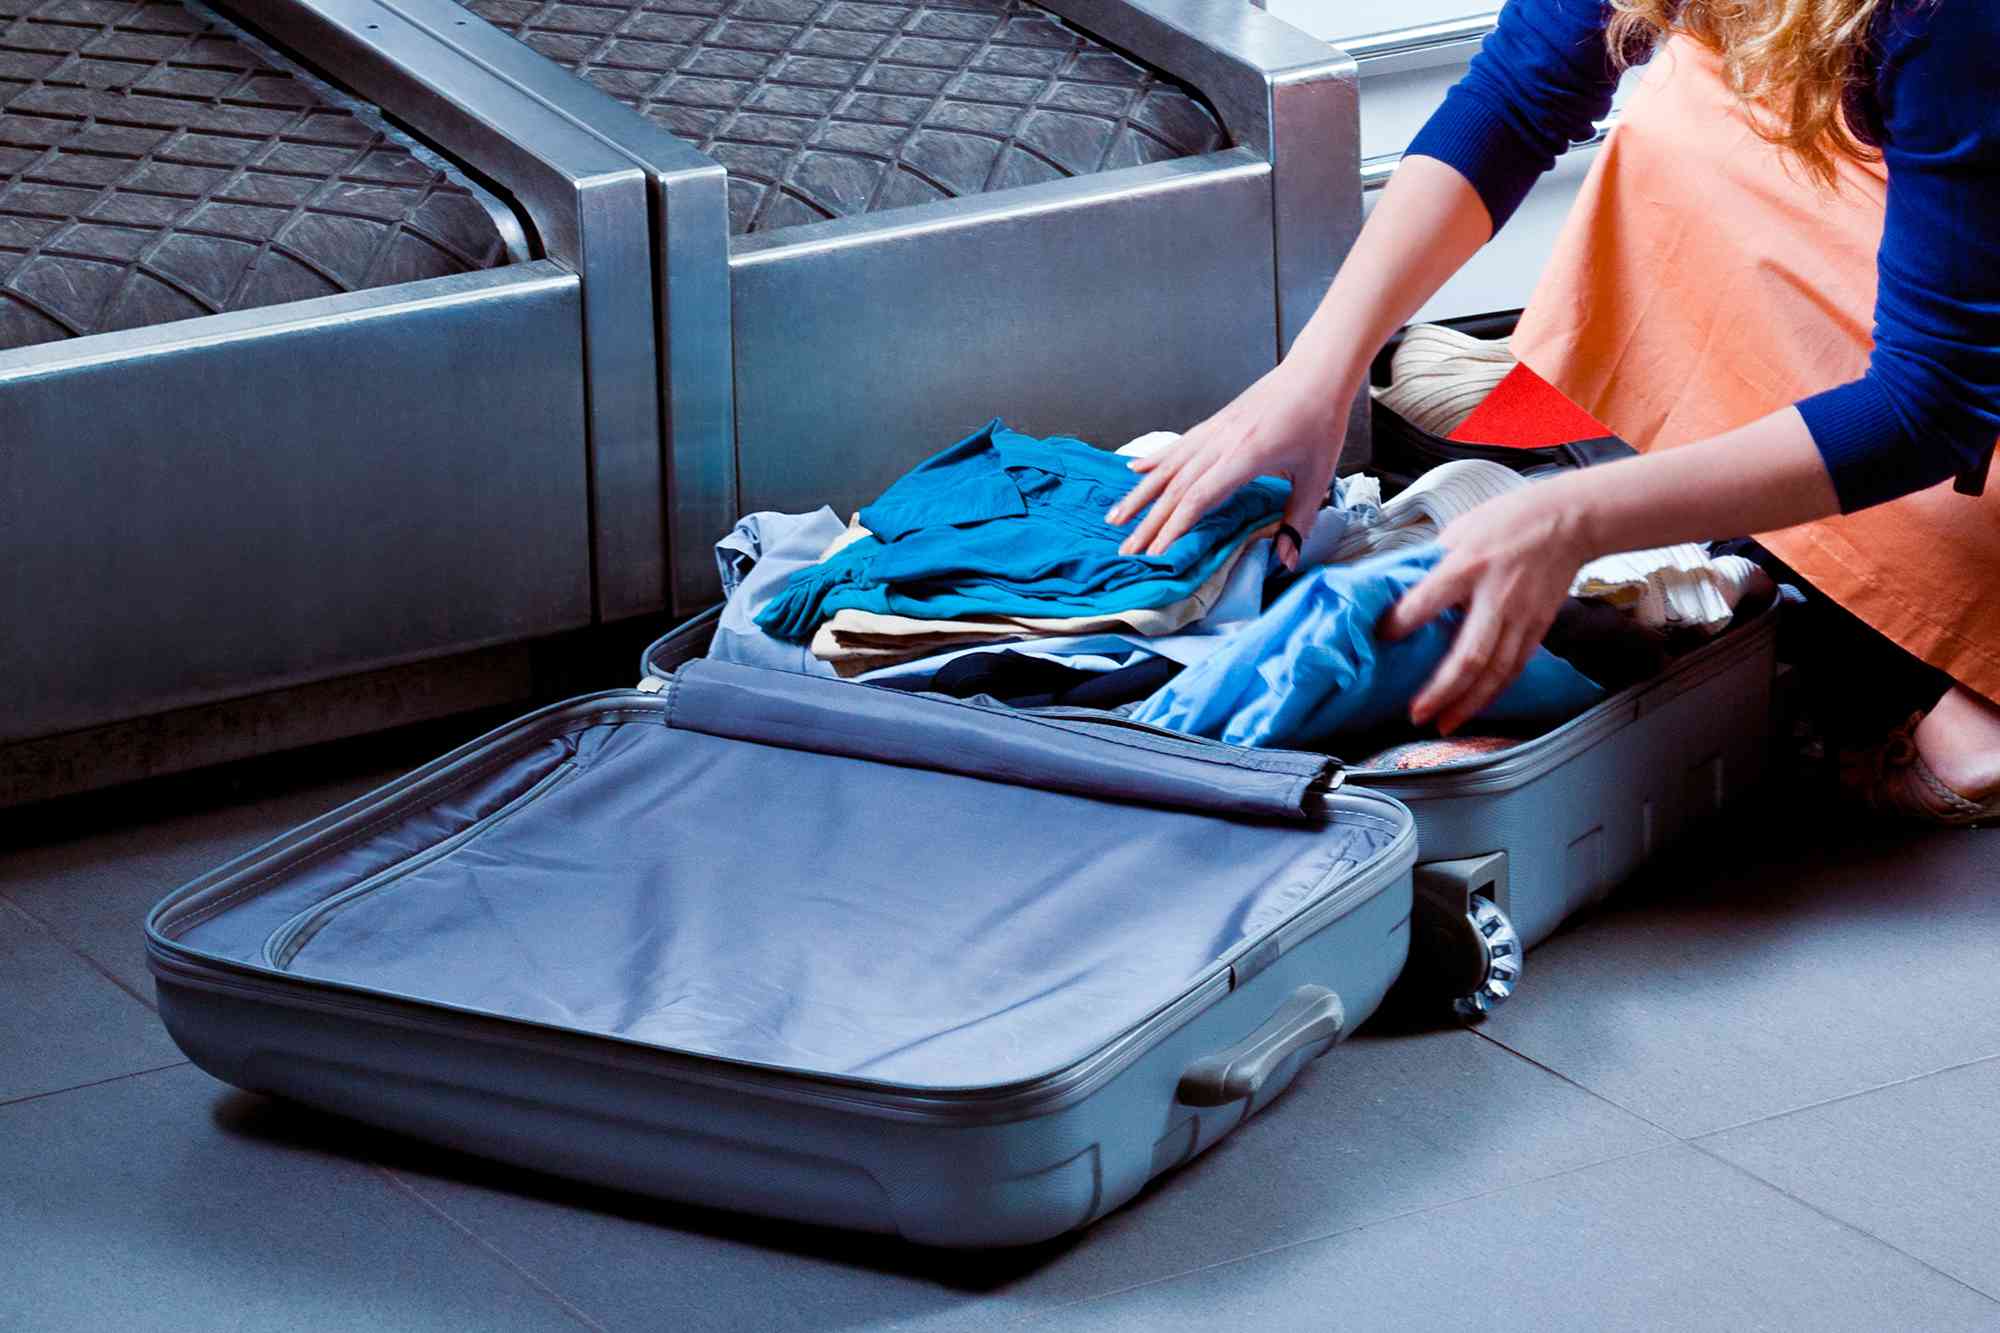 this is the most common item travelers leave behind in airports